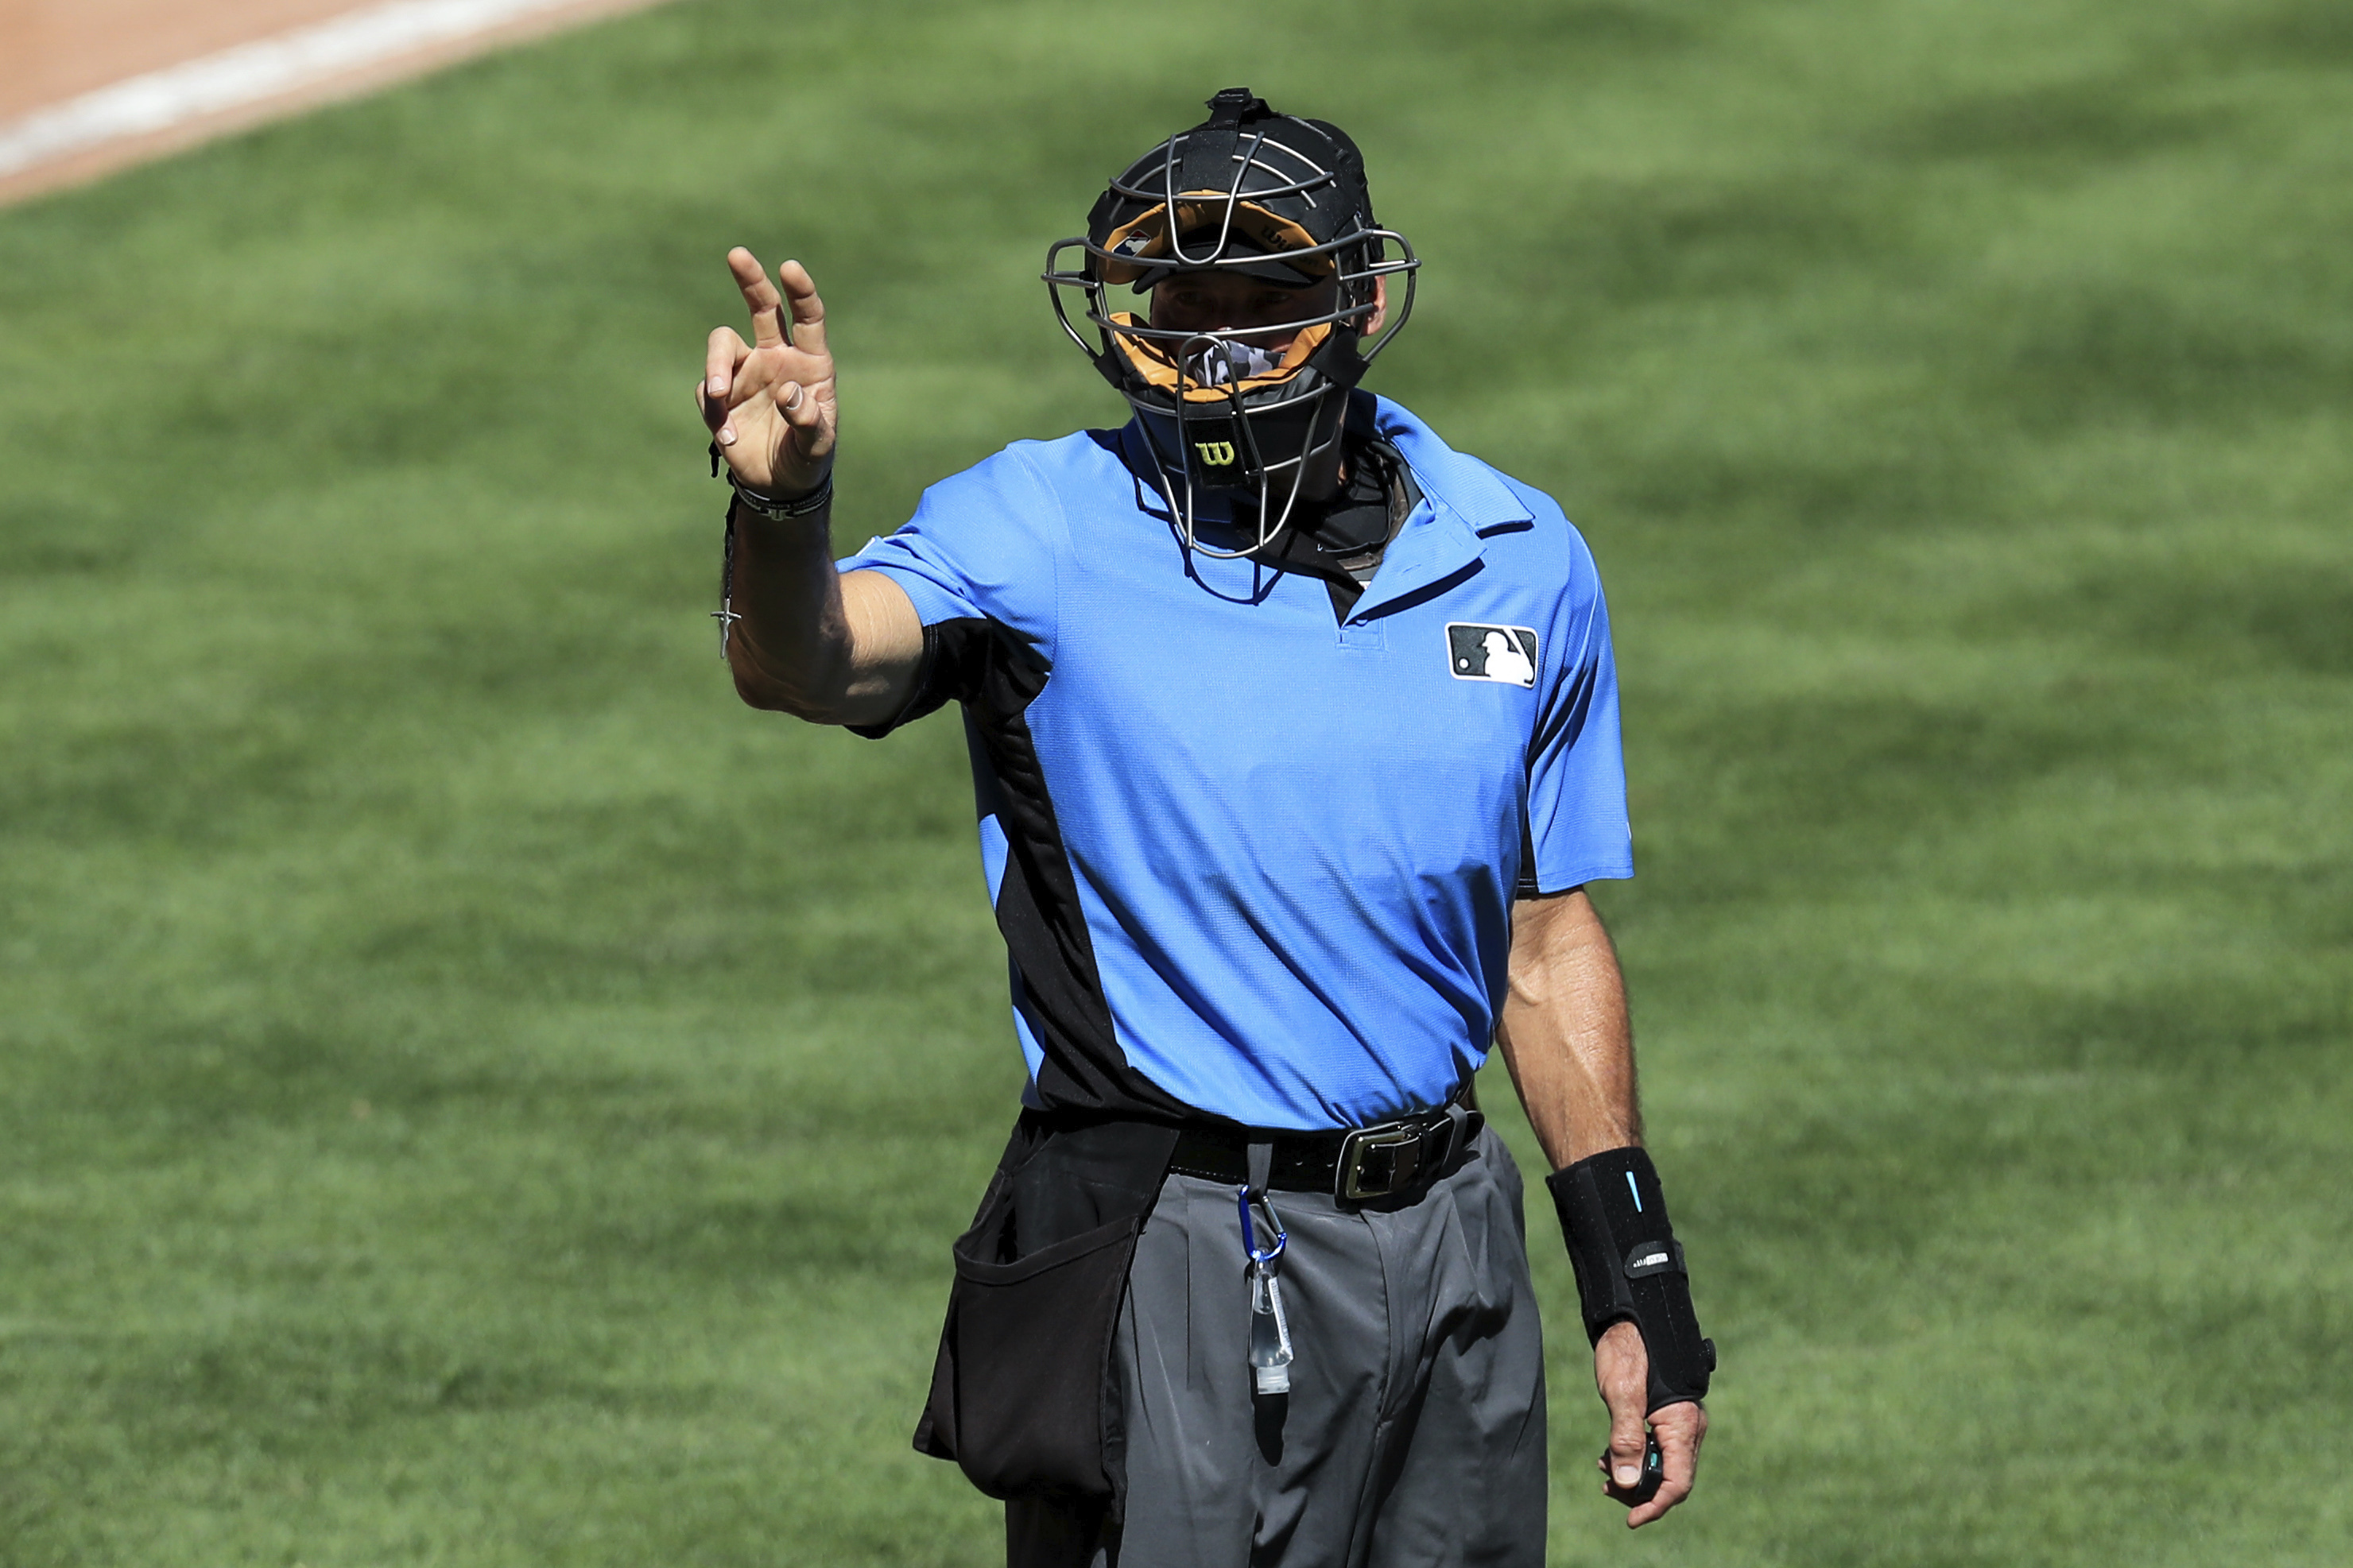 Embattled Umpire Angel Hernandez Criticized Again After Questionable Outing  - video Dailymotion